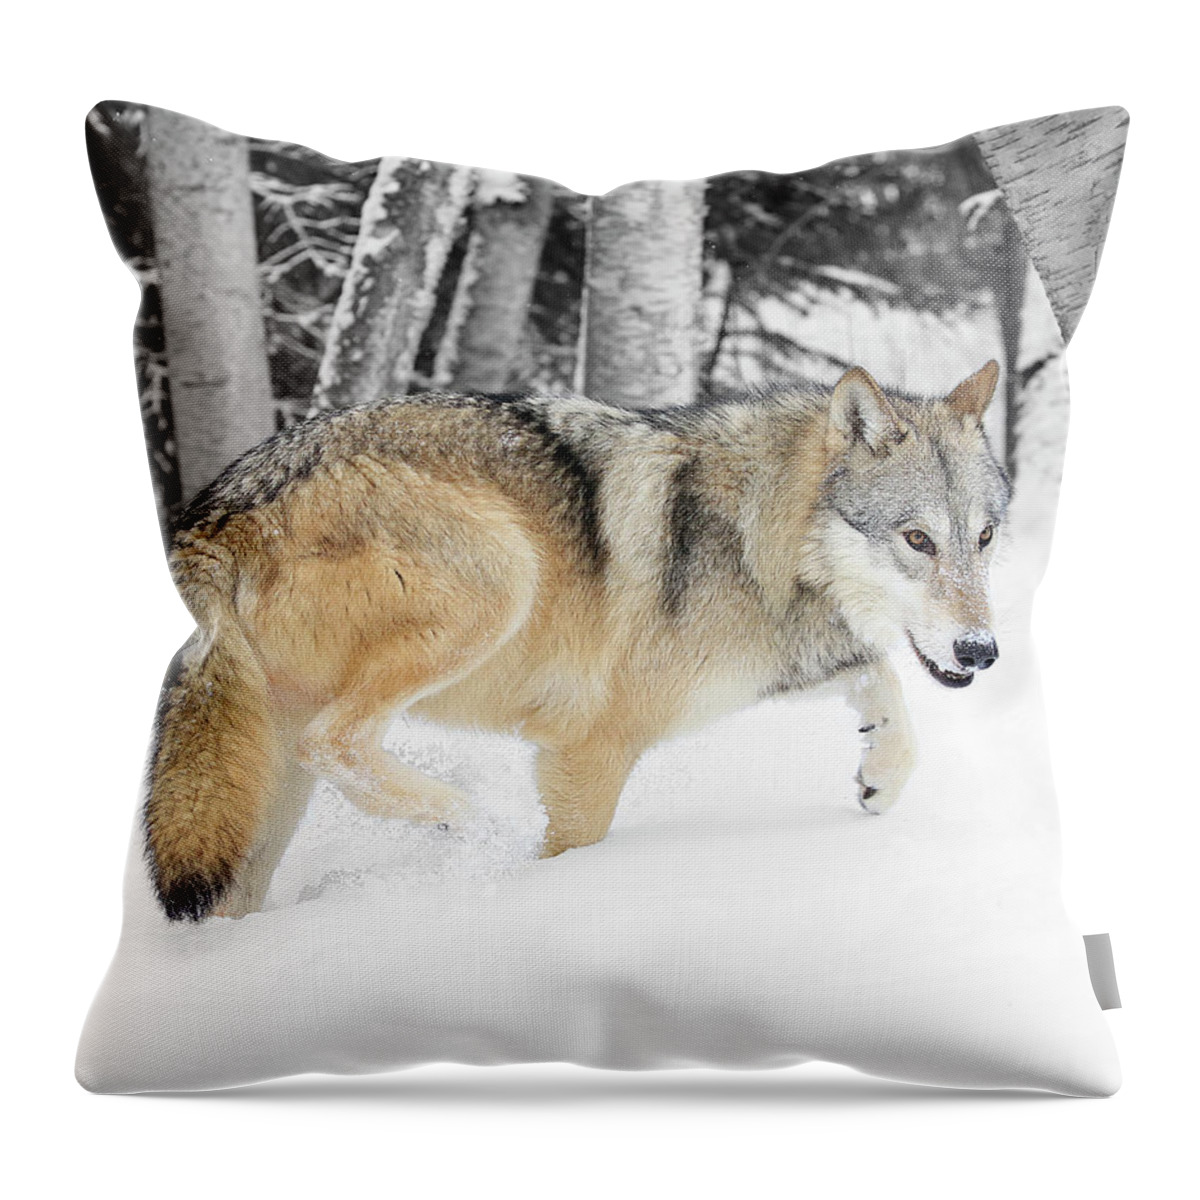 Wolf Throw Pillow featuring the photograph Winter Forest Wolf by Steve McKinzie